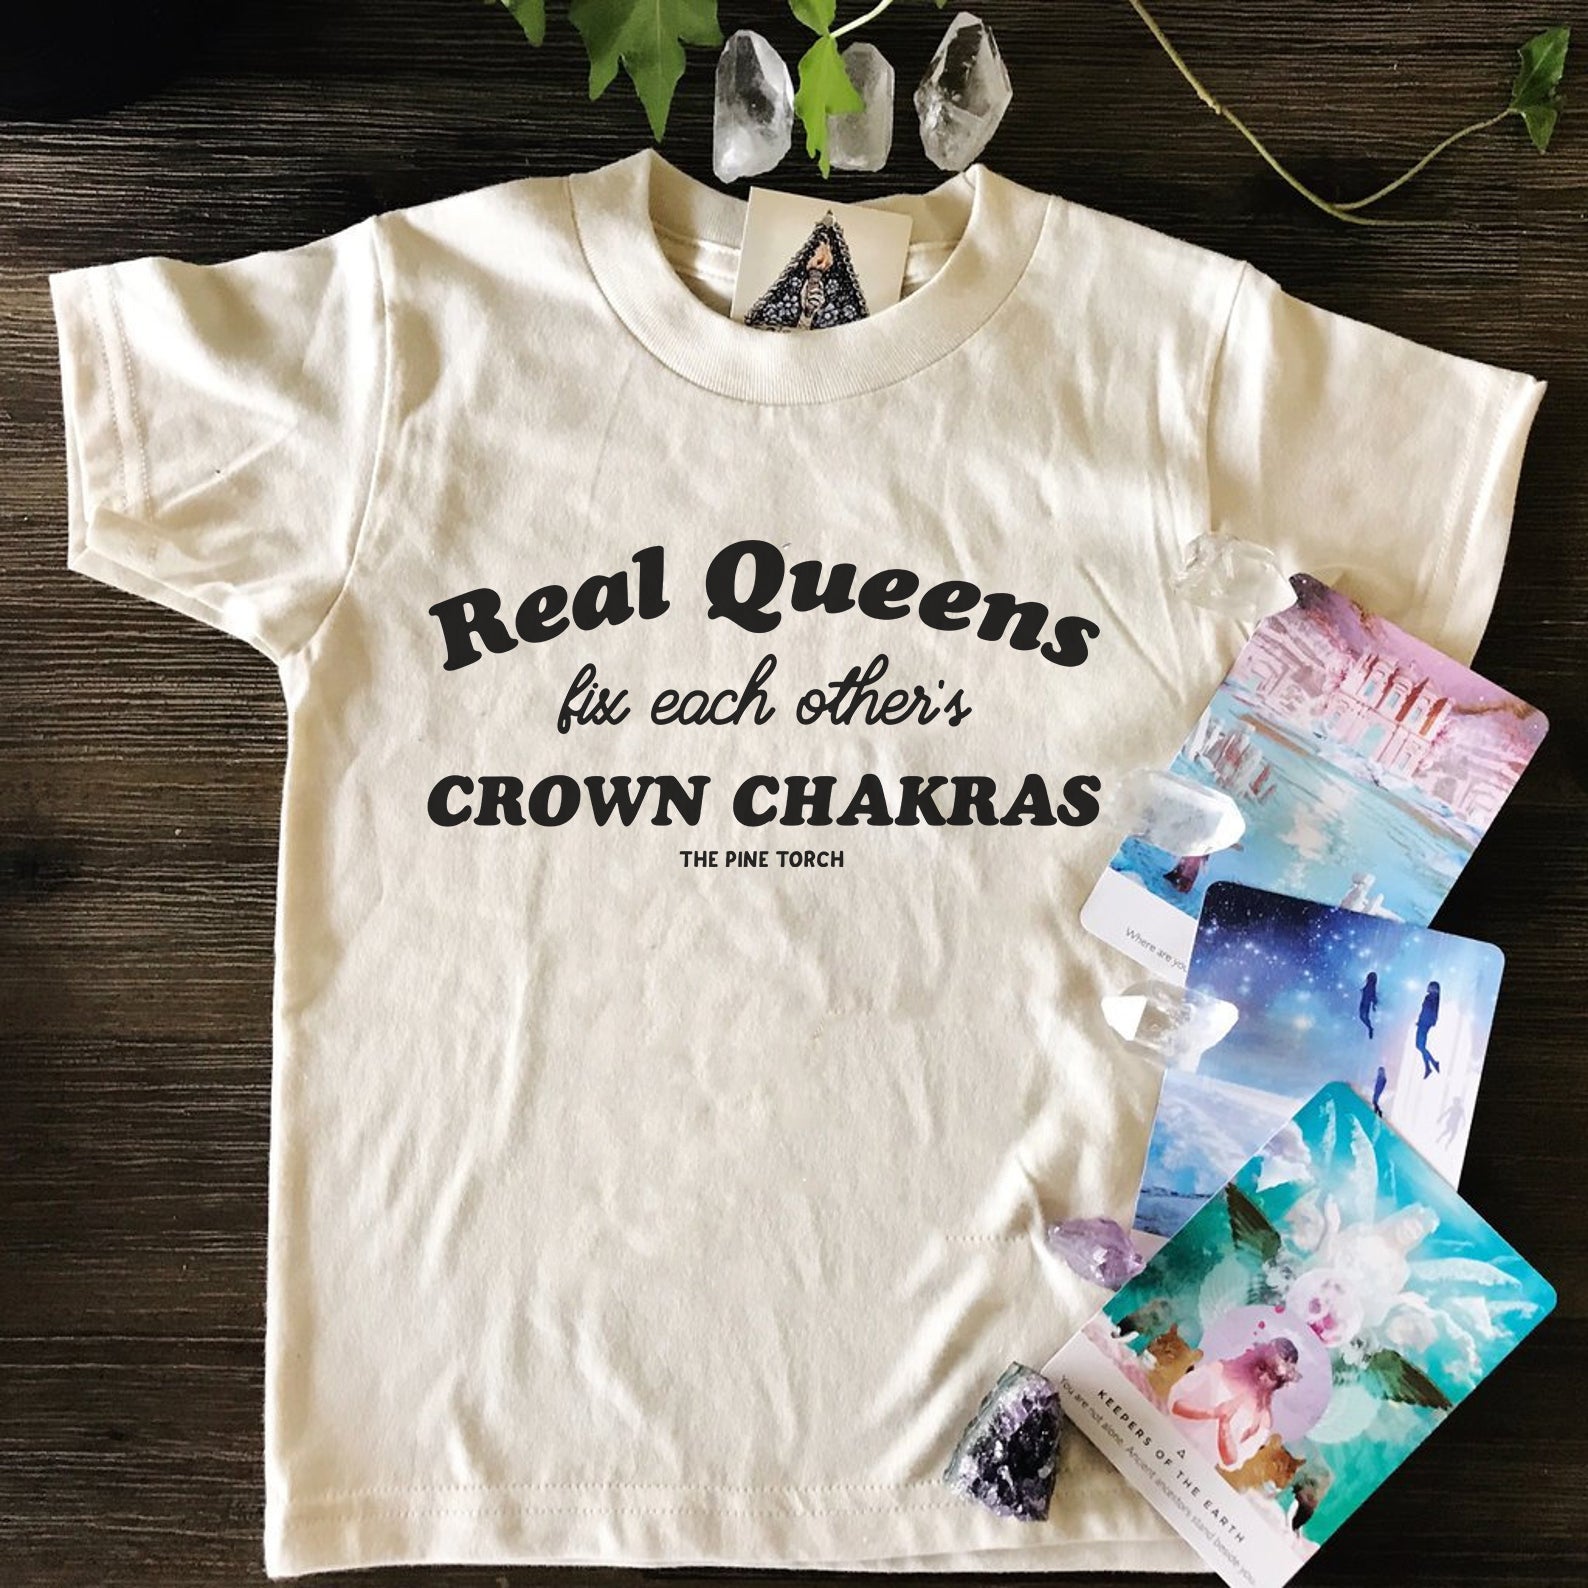 « REAL QUEENS FIX EACH OTHER'S CROWN CHAKRAS » KID'S TEE